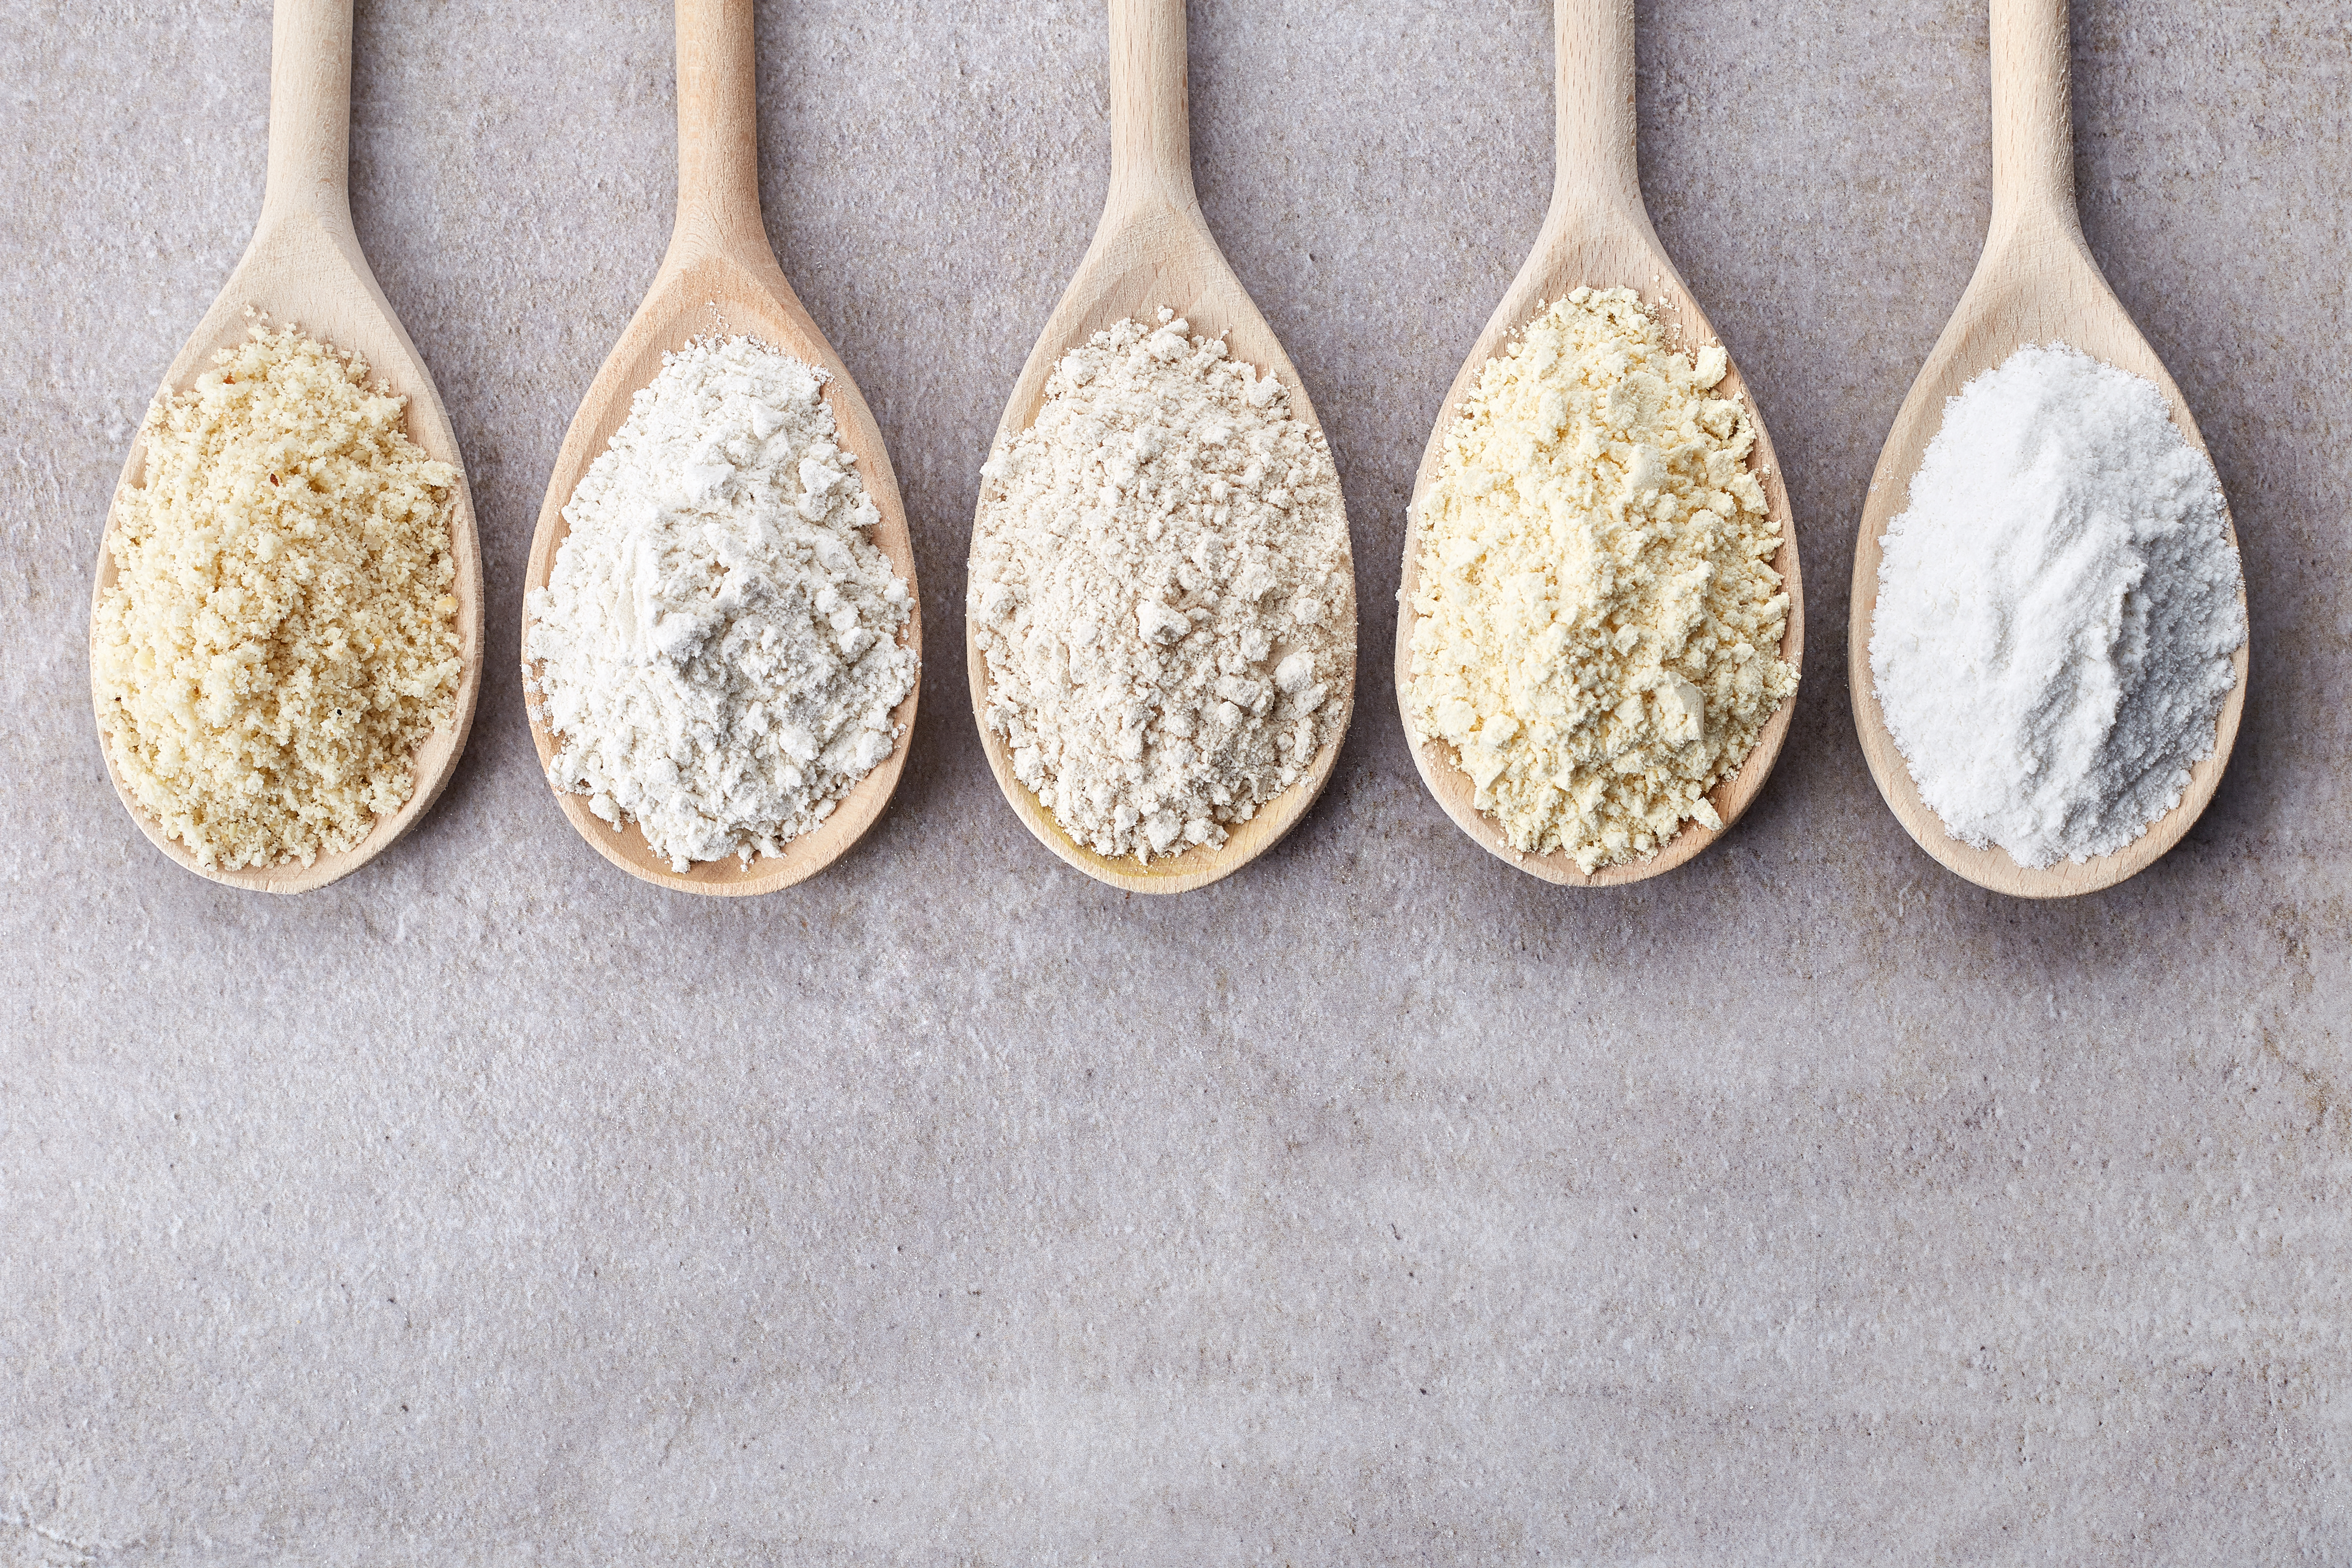 5 Grain Free Flours You Will Love